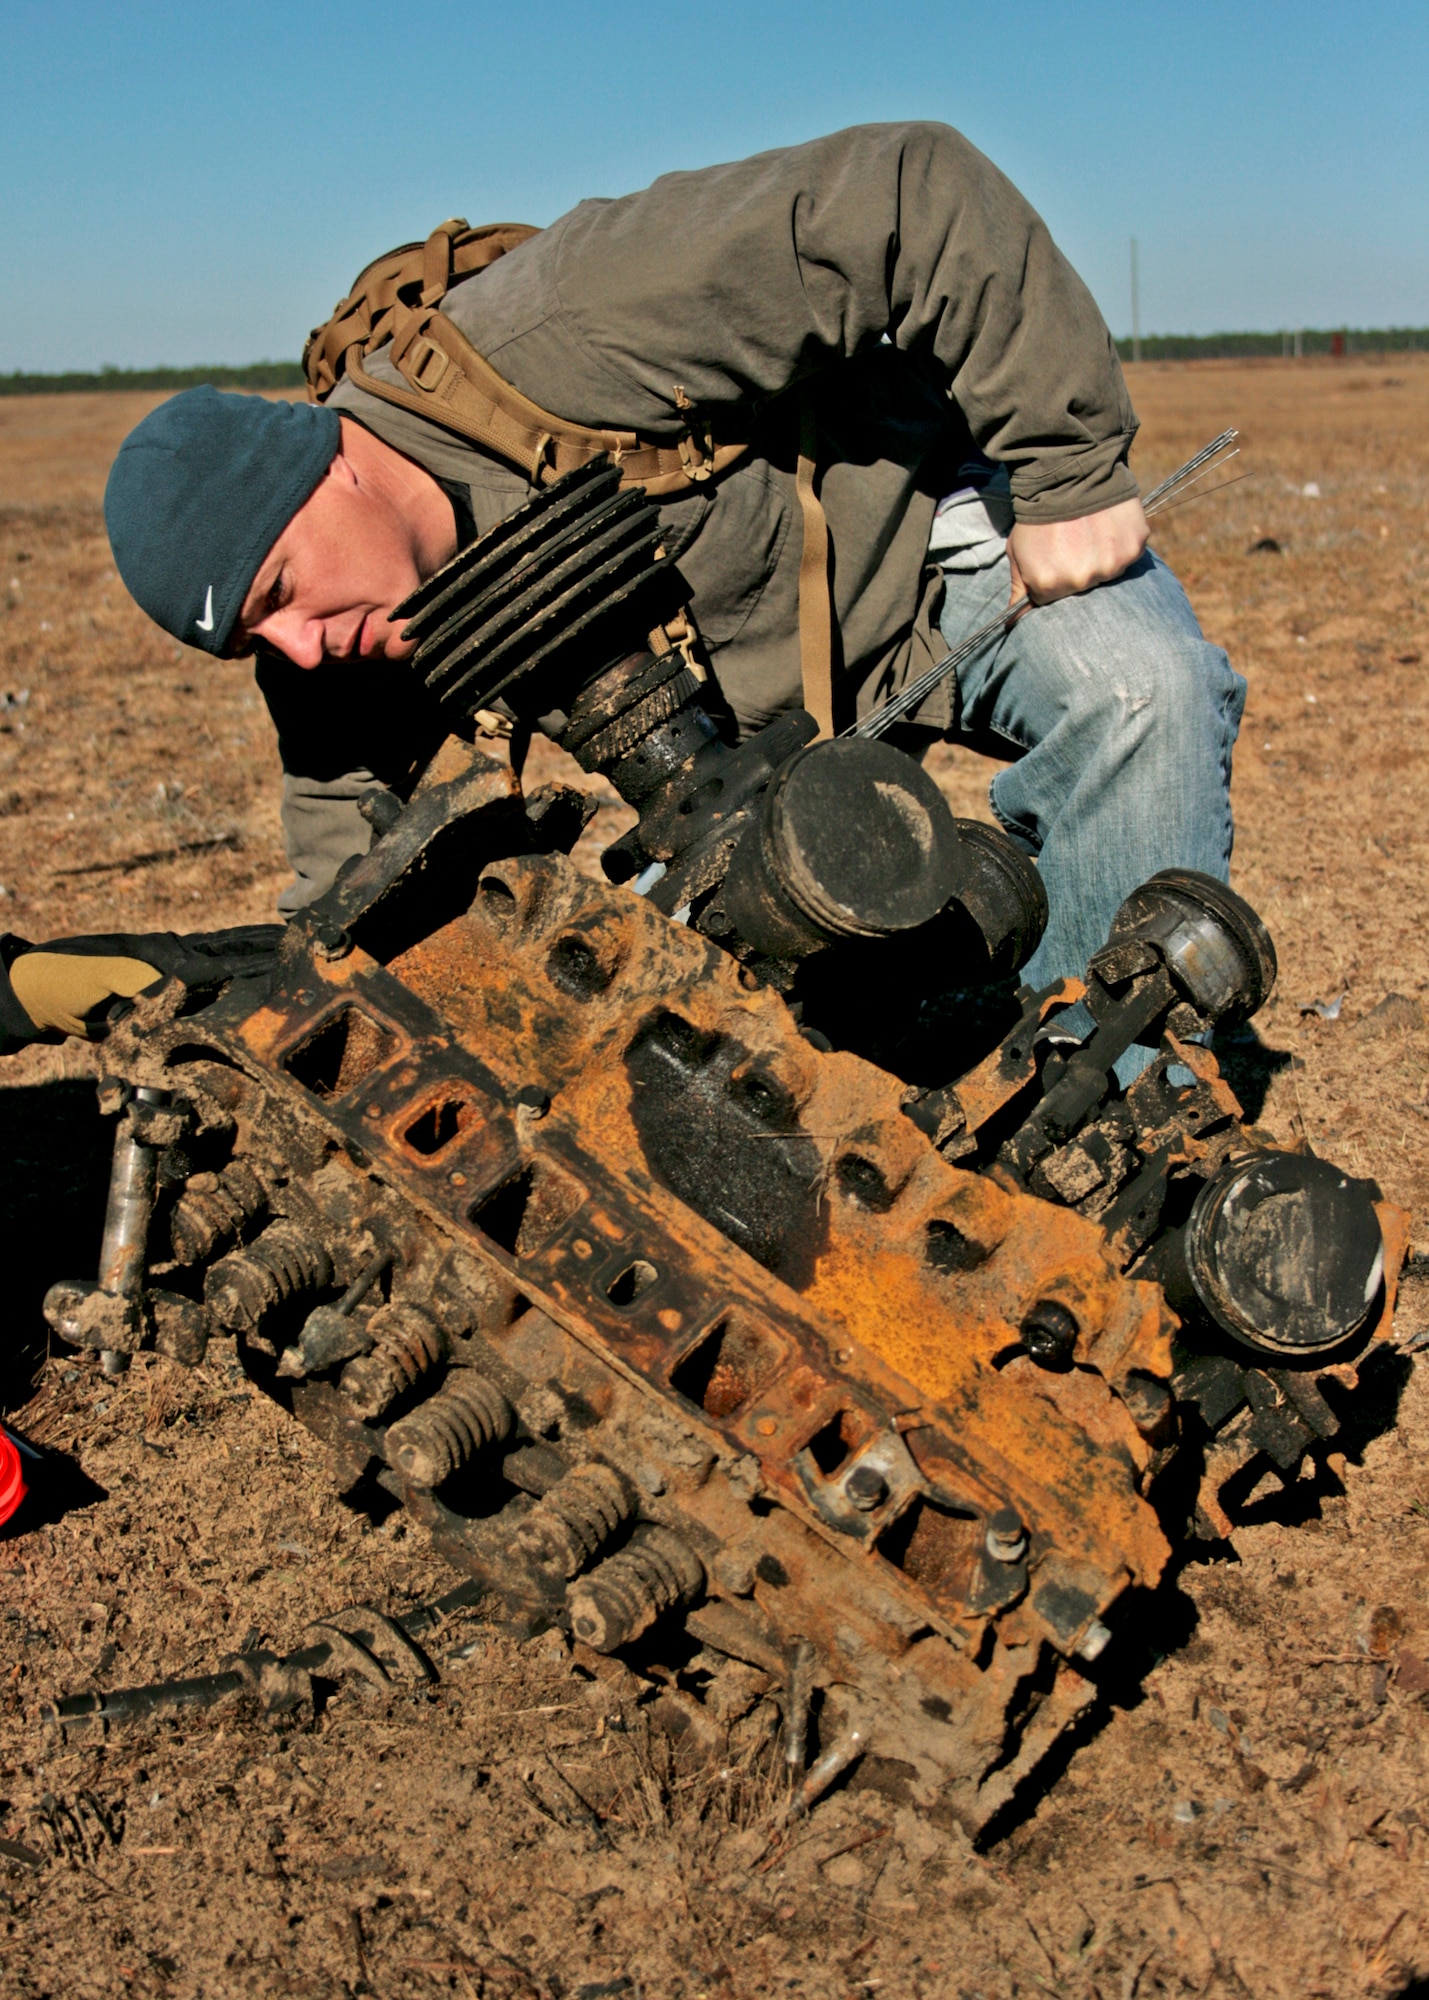 Gunnery Sgt. Hugh McClenney, explosive ordnance disposal technician at Marine Air Station Cherry Point, N.C., examines the scorched engine block of a box truck while investigating the created crime scene Dec. 1 at Eglin Air Force Base, Fla. The investigations were part of the FBI's large vehicle post blast school attended by state and local law enforcement agencies as well as Marine and Air Force EOD technicians. Three vehicles were blown up to create the crime scenes that students would investigate.  This was the largest class held in the U.S. and the first ever here. (U.S. Air Force photo/ 2nd Lt. Andrew Caulk)